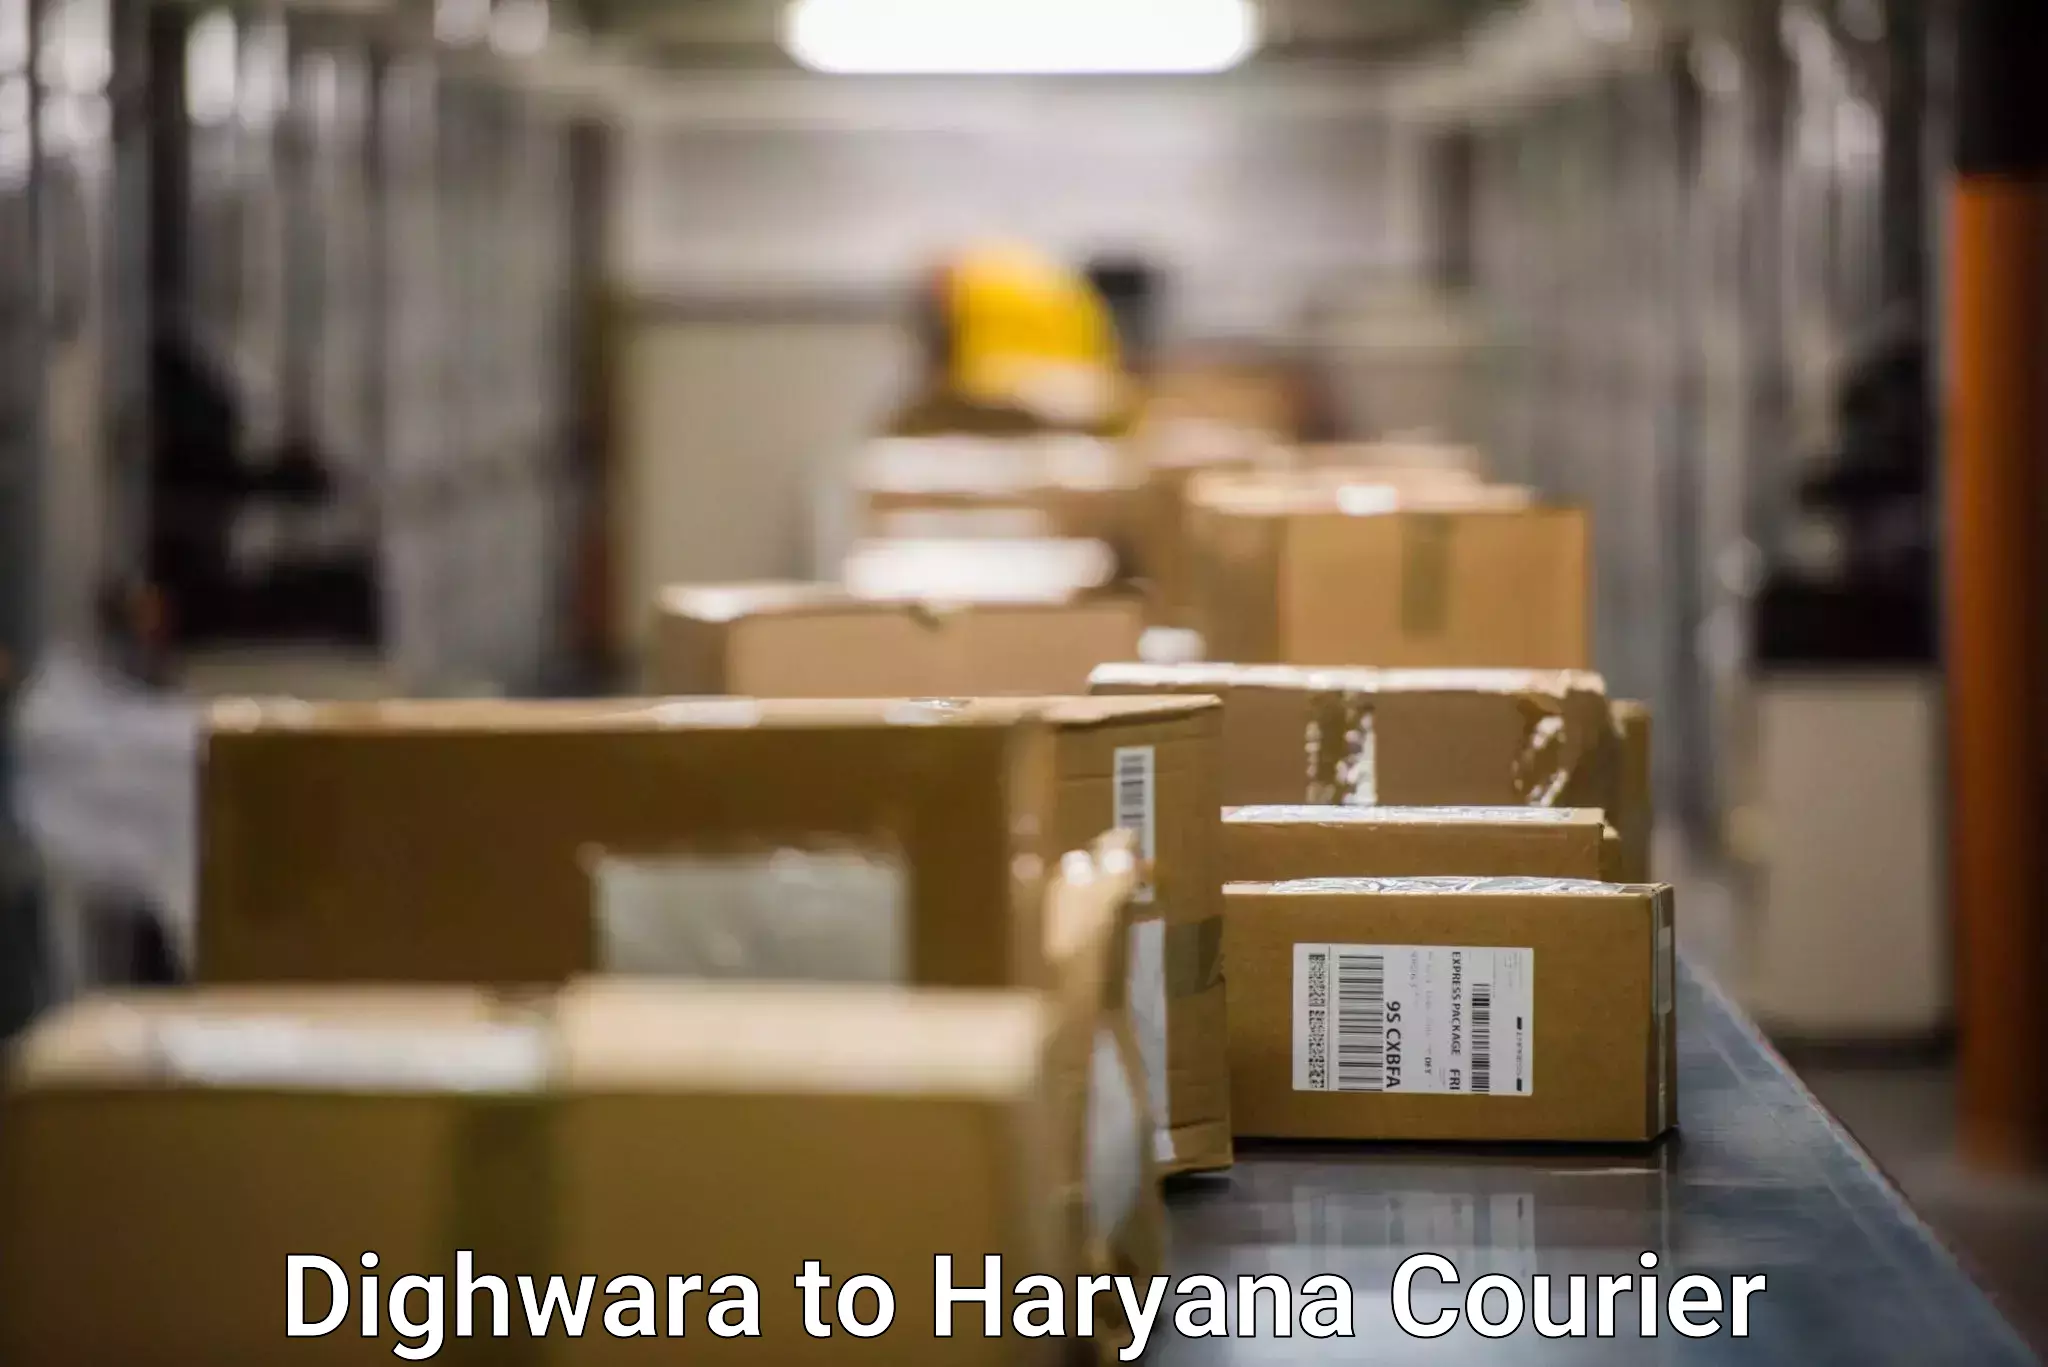 High-quality delivery services Dighwara to Chaudhary Charan Singh Haryana Agricultural University Hisar